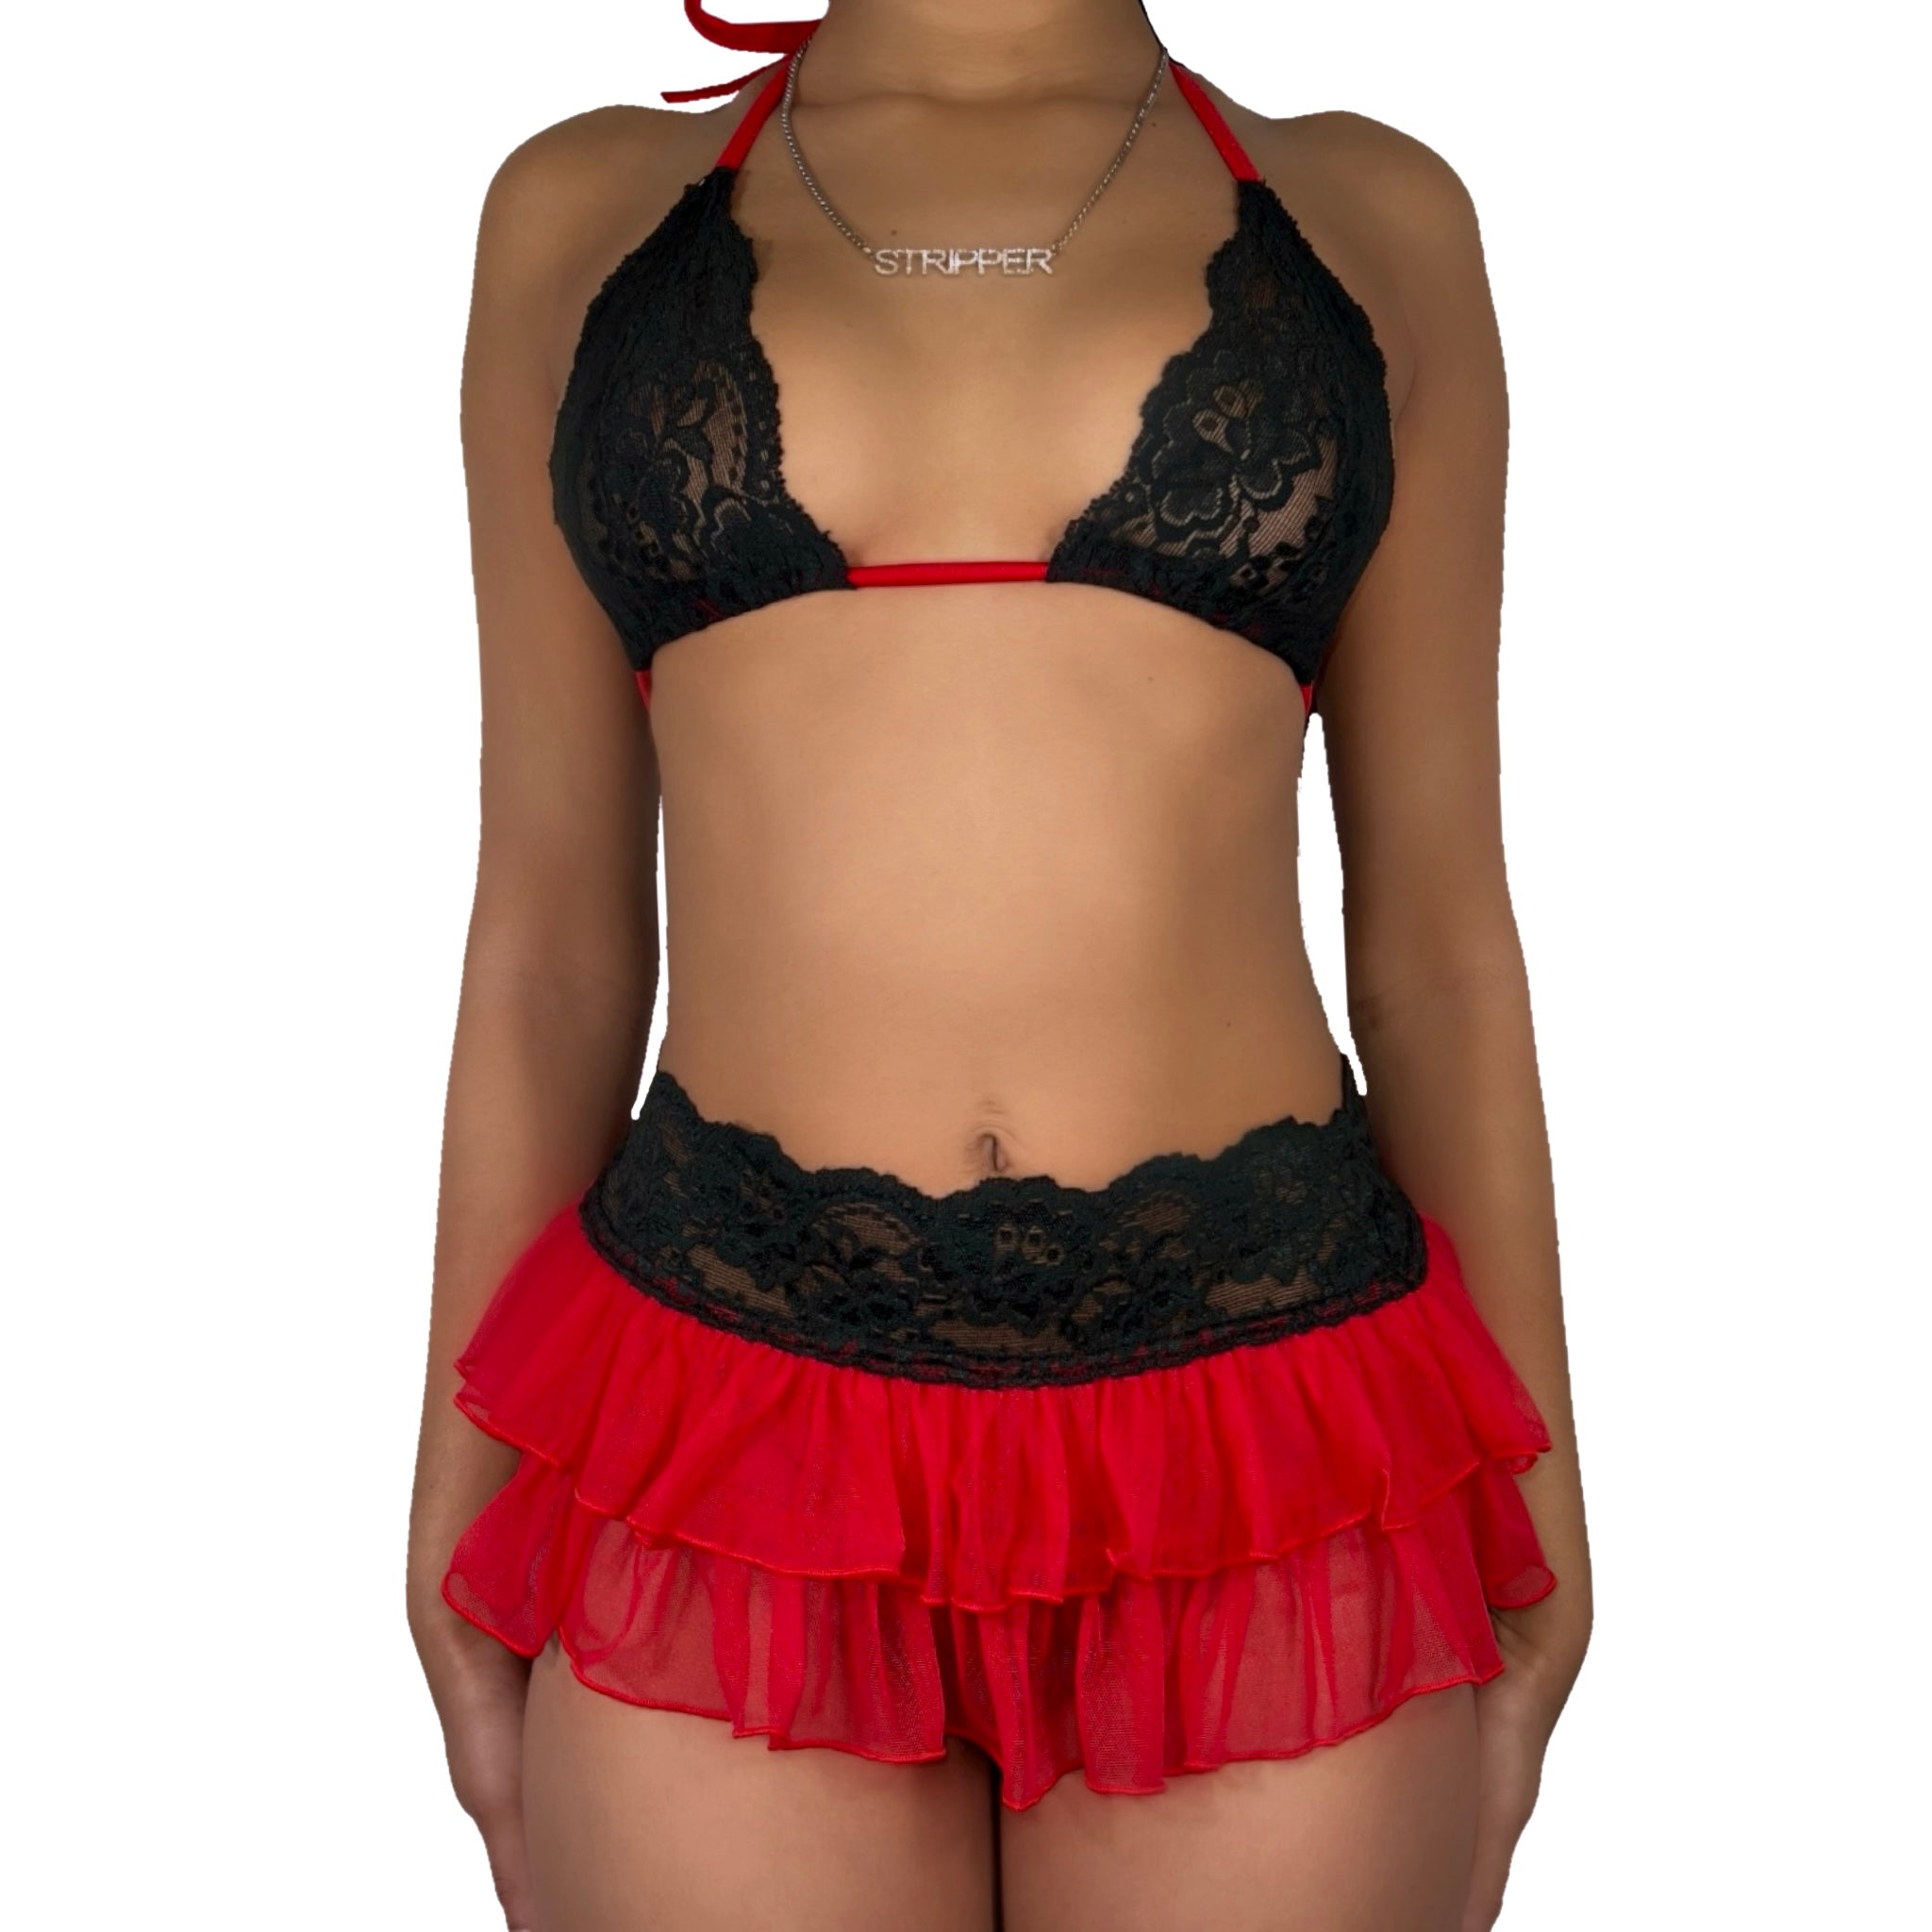 Stripper Cam Girl Sexy Lace Skirt Set: Black and Red